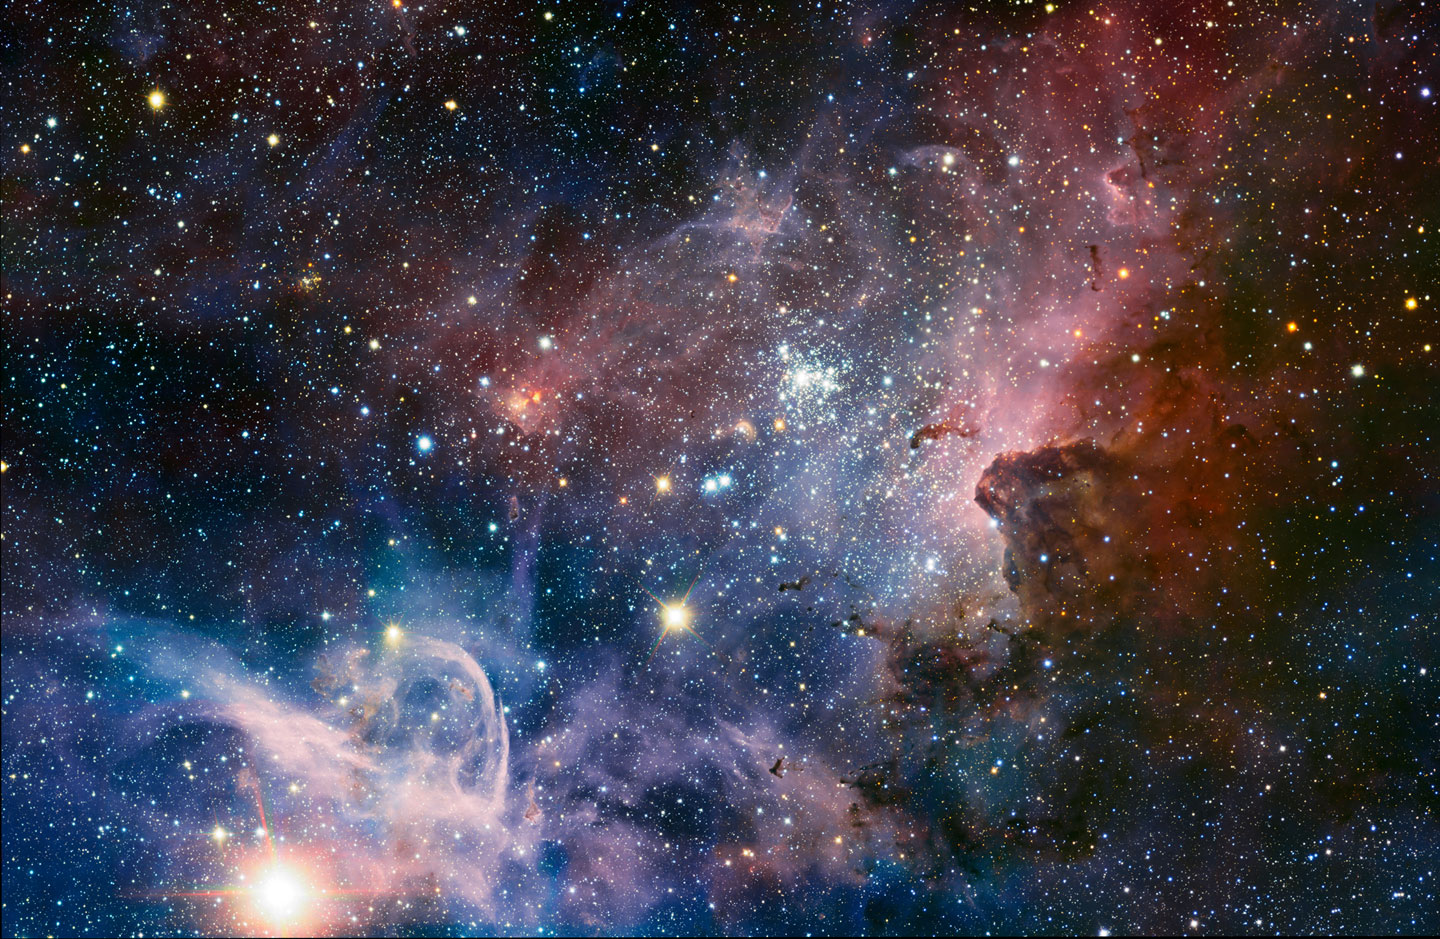 ESO infrared image of a region near the Keyhole Nebula, showing open clusters Trumpler 14 and Trumpler 16